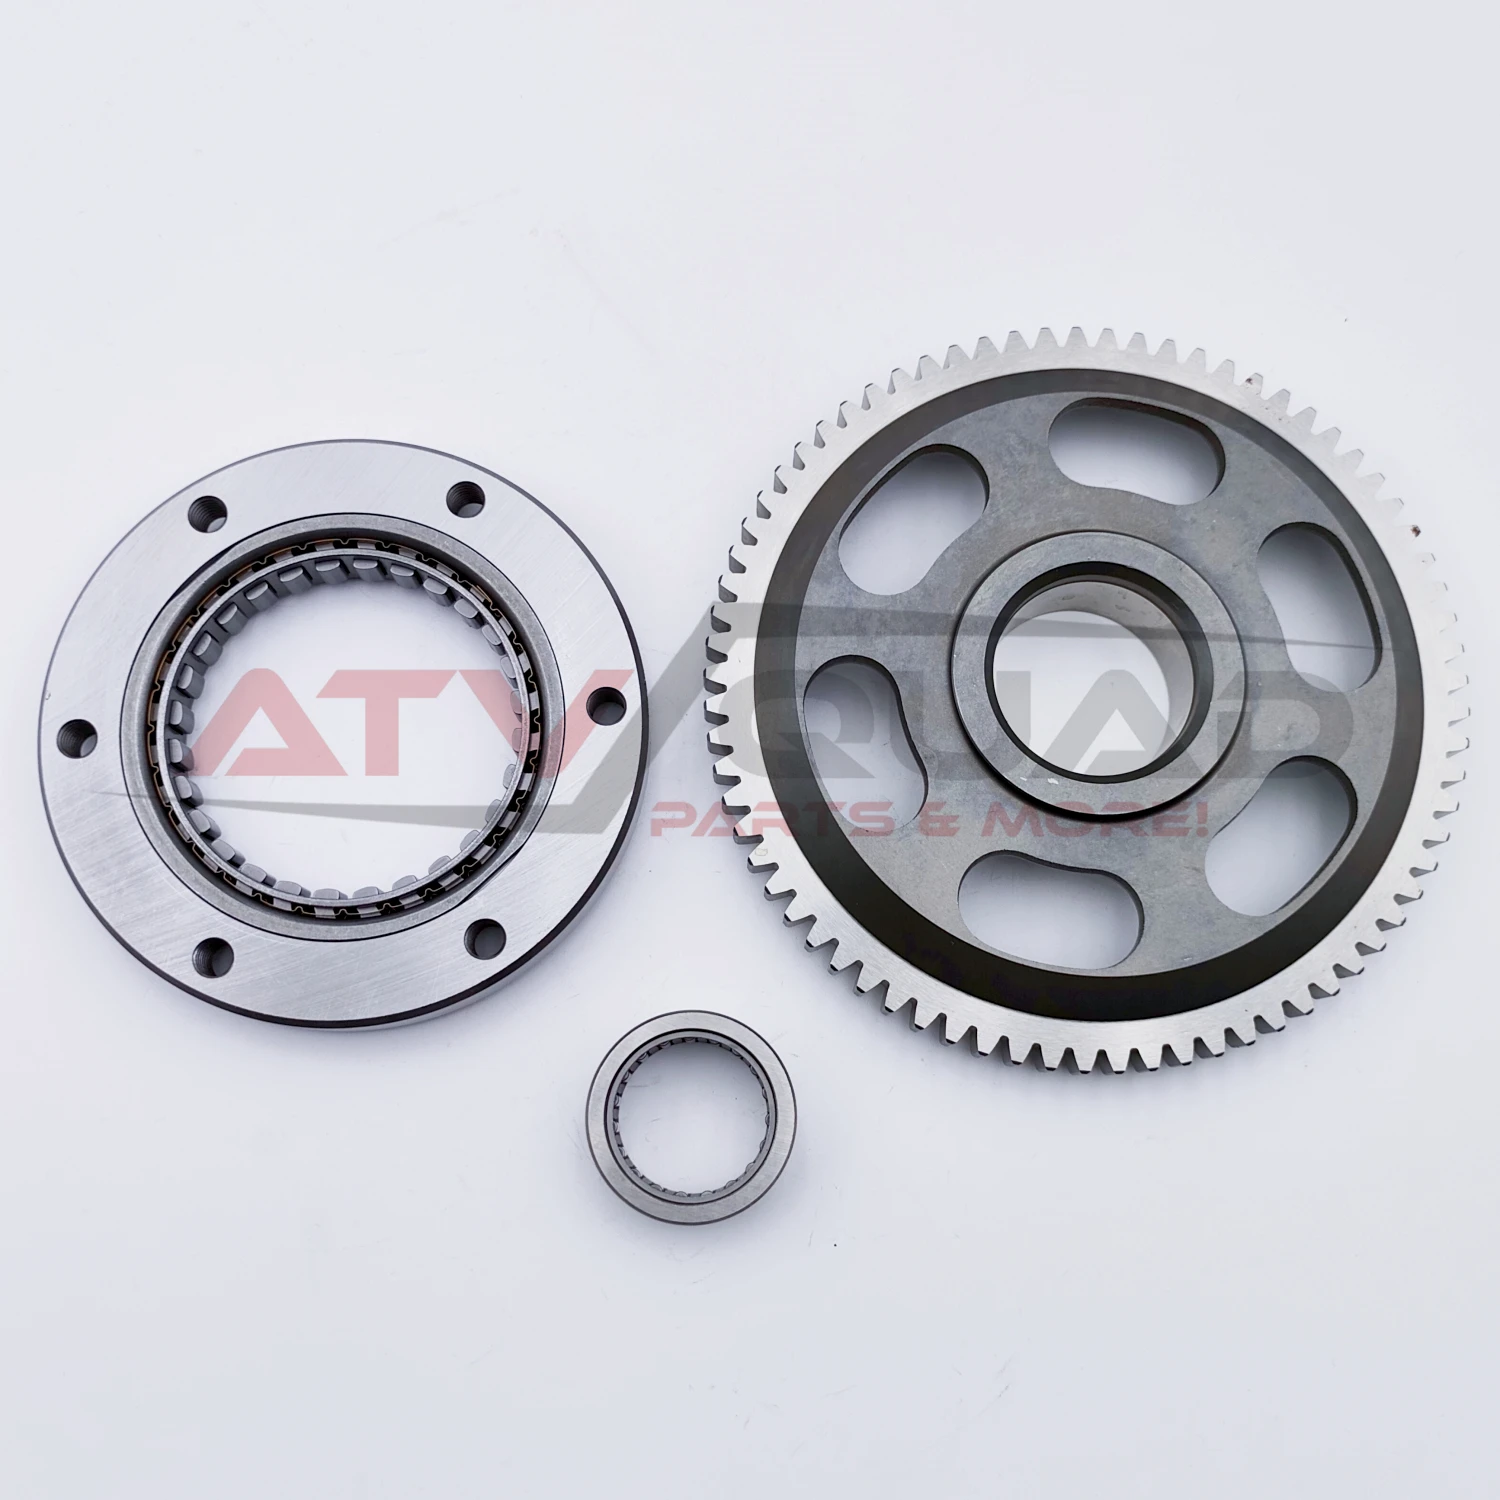 Overriding Clutch Driven Gear Kit for CFmoto 400 450 500 CF188 500S 520 550 600 625 CF196 0180-091200 30401-02800 0180-091001